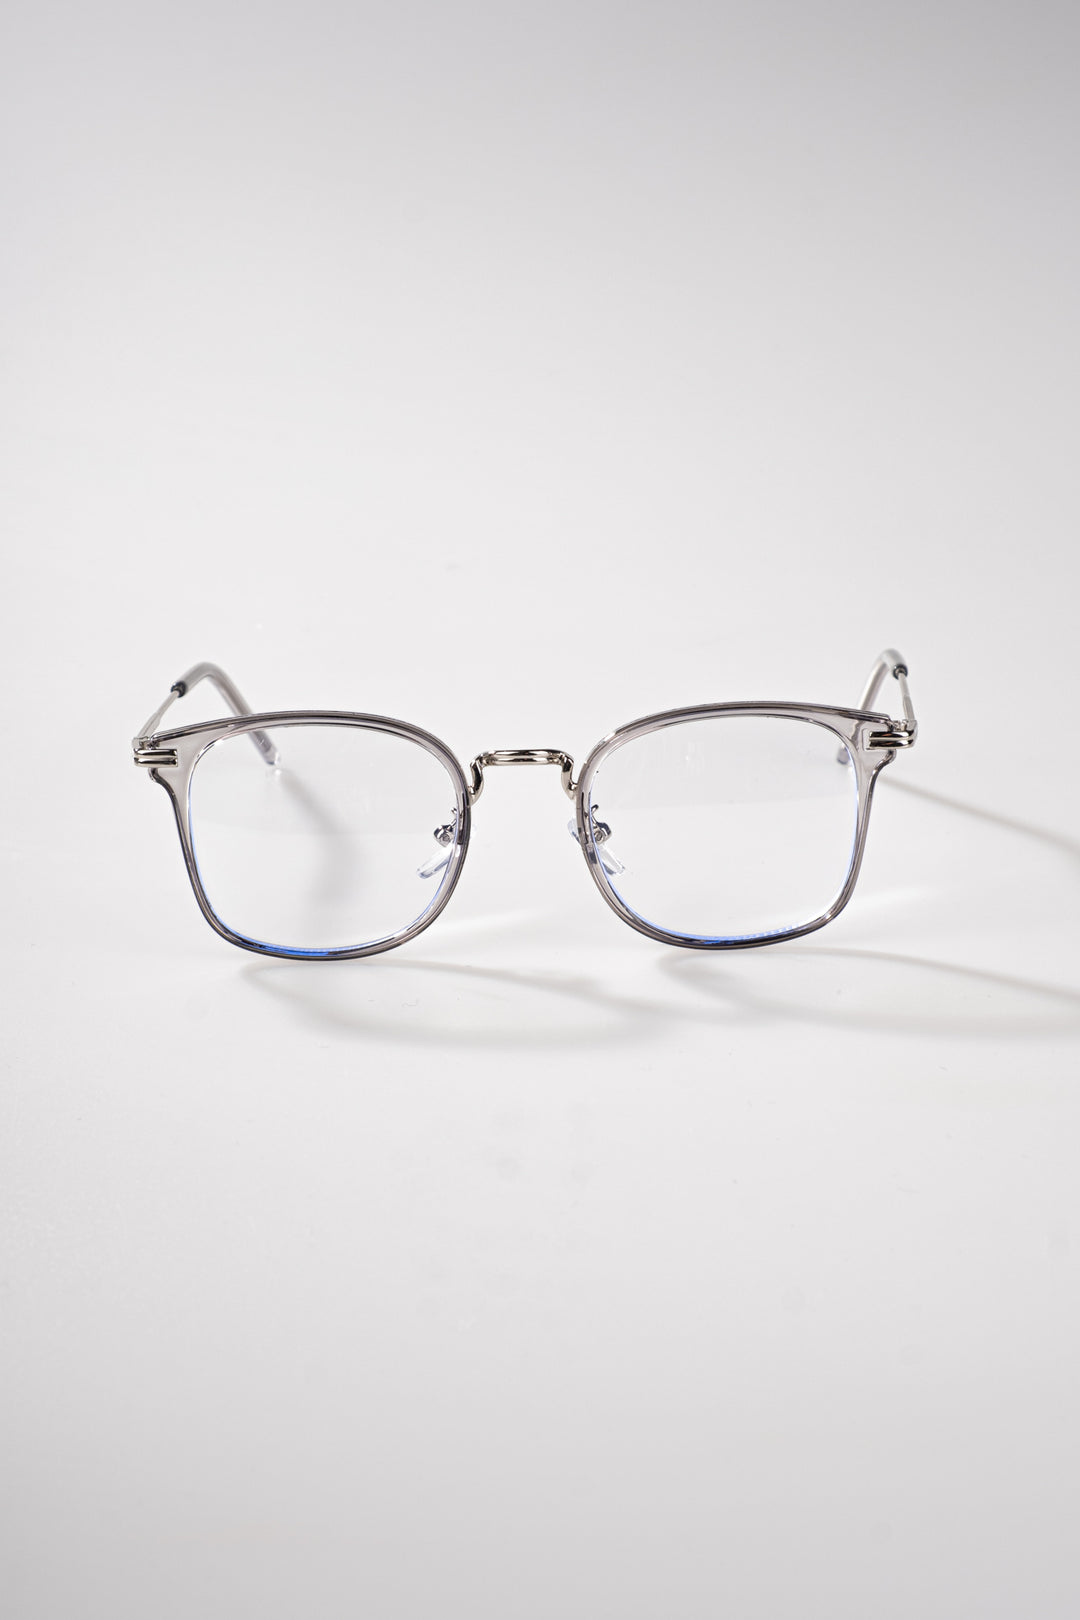 Lores Blue Light Protection Glasses